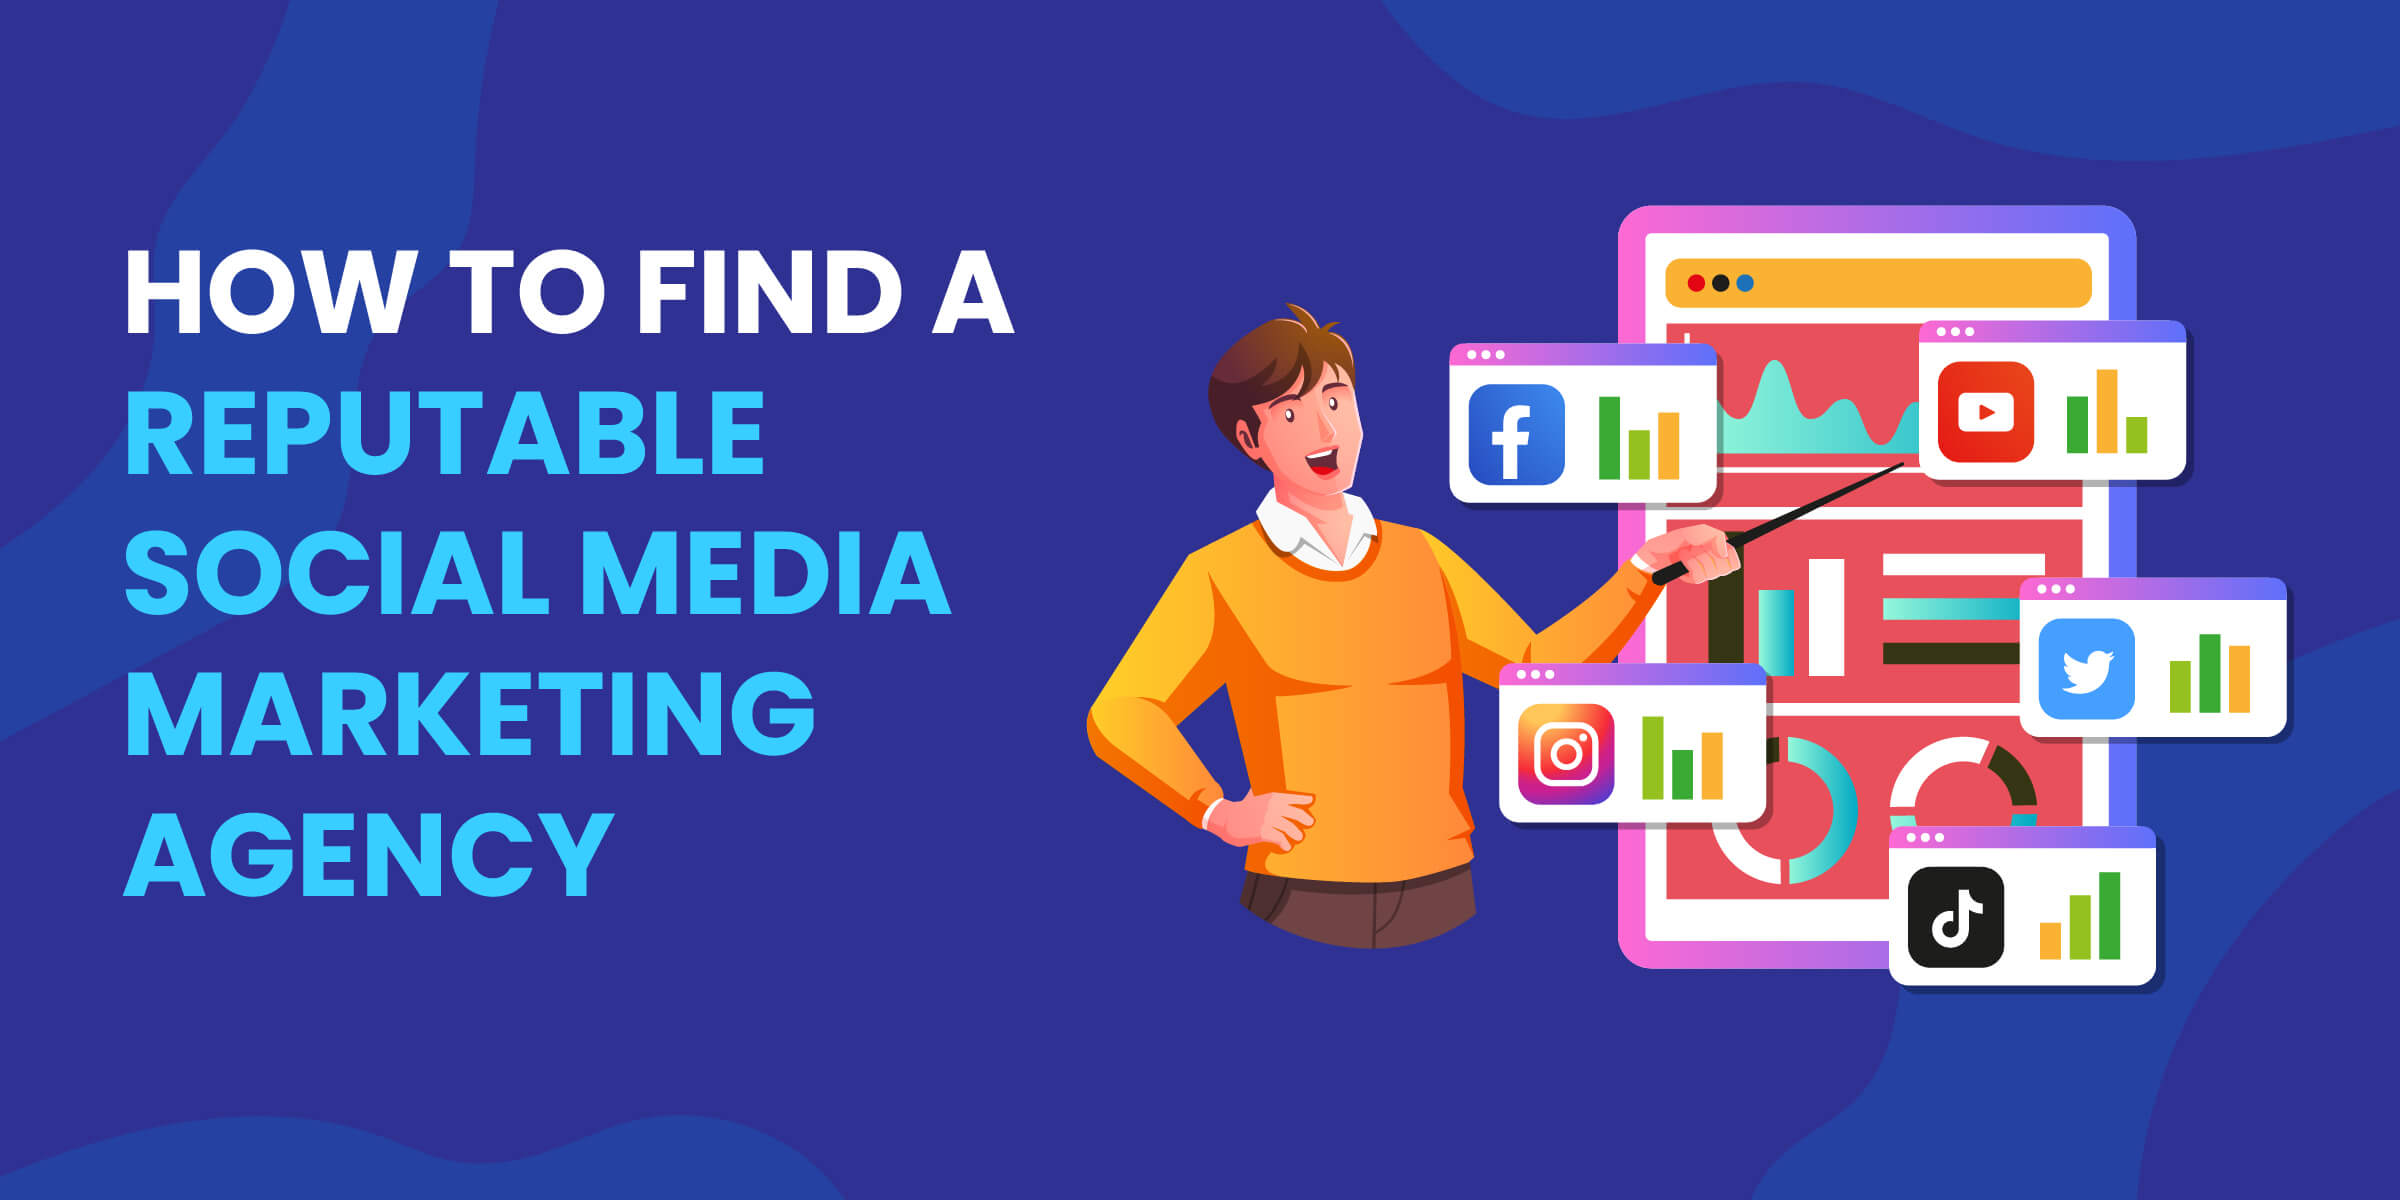 How to Find Reputable Social Media Marketing Agency